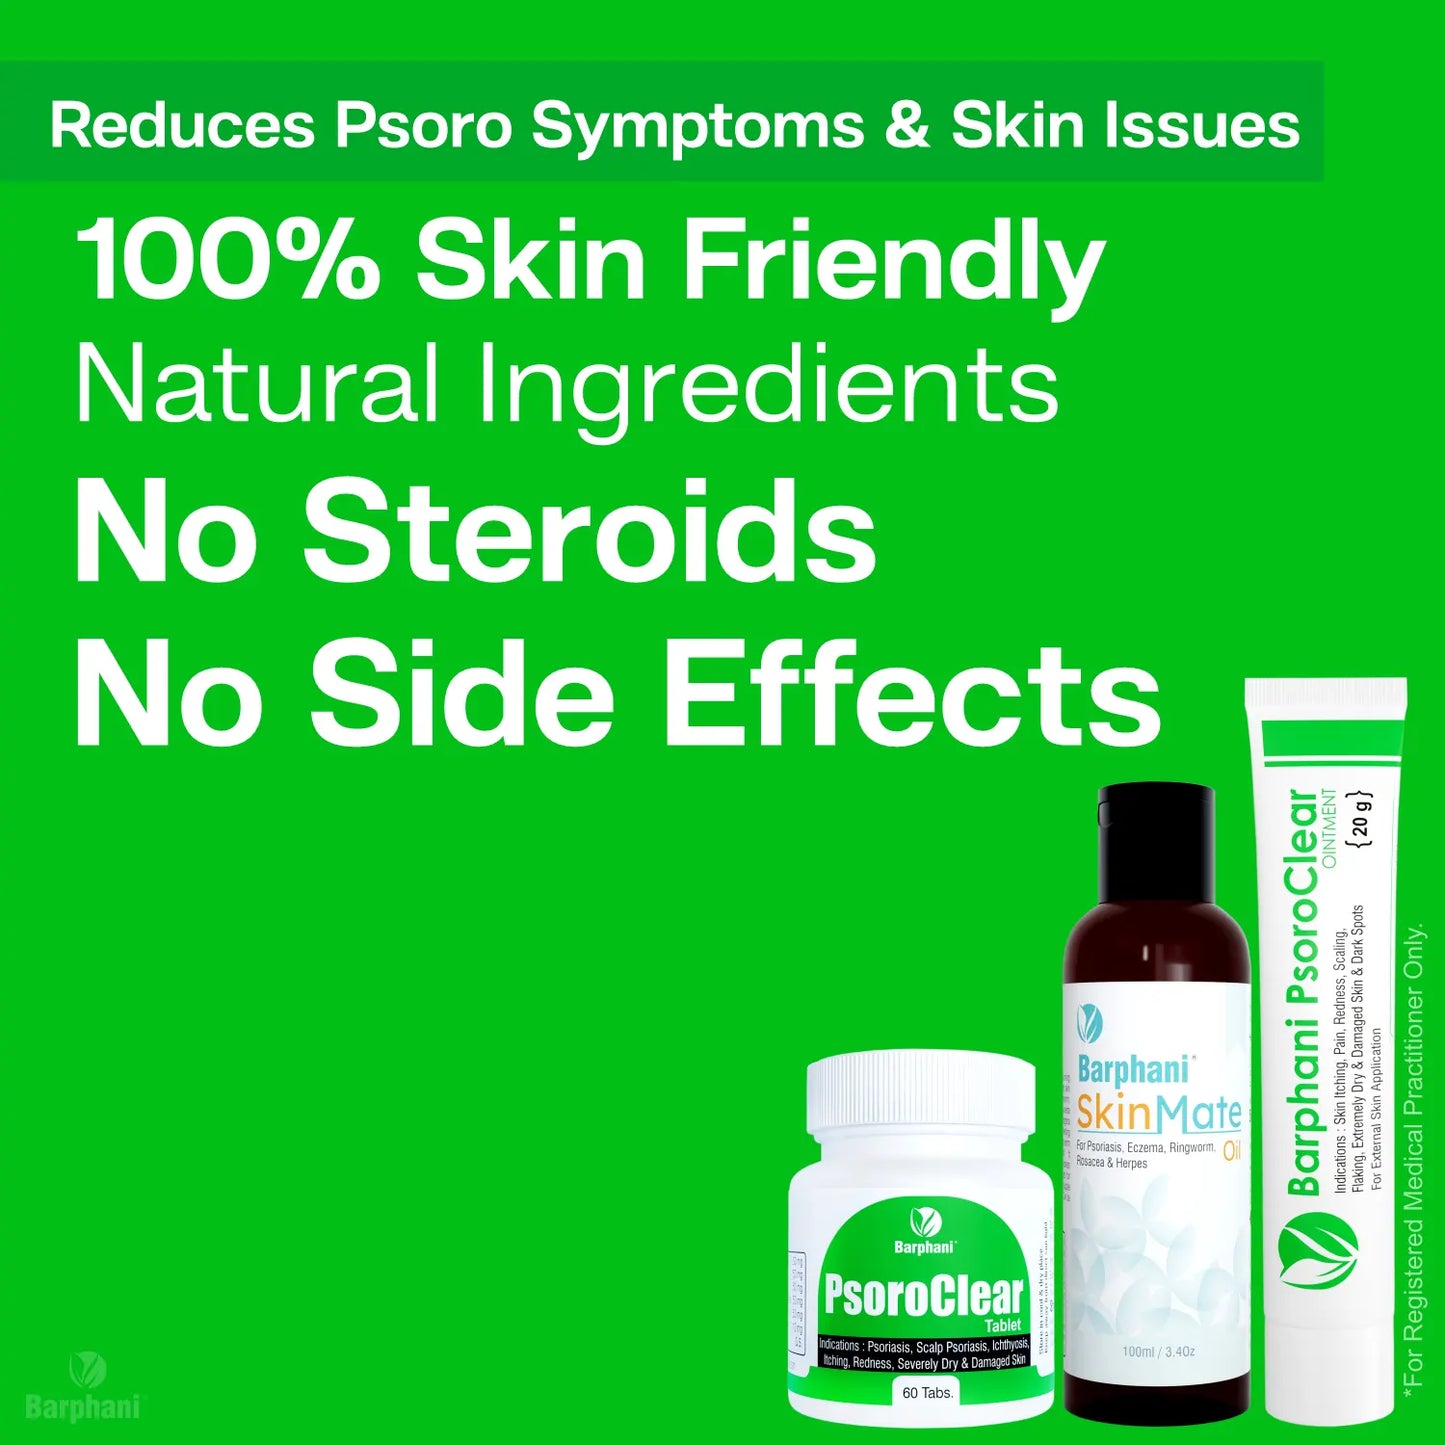 Barphani PsoroClear Trio Pack - Psoriasis Cream(2) PsoroClear Tab(60) SkinMate Oil(100ml) Longterm Psoro Relief